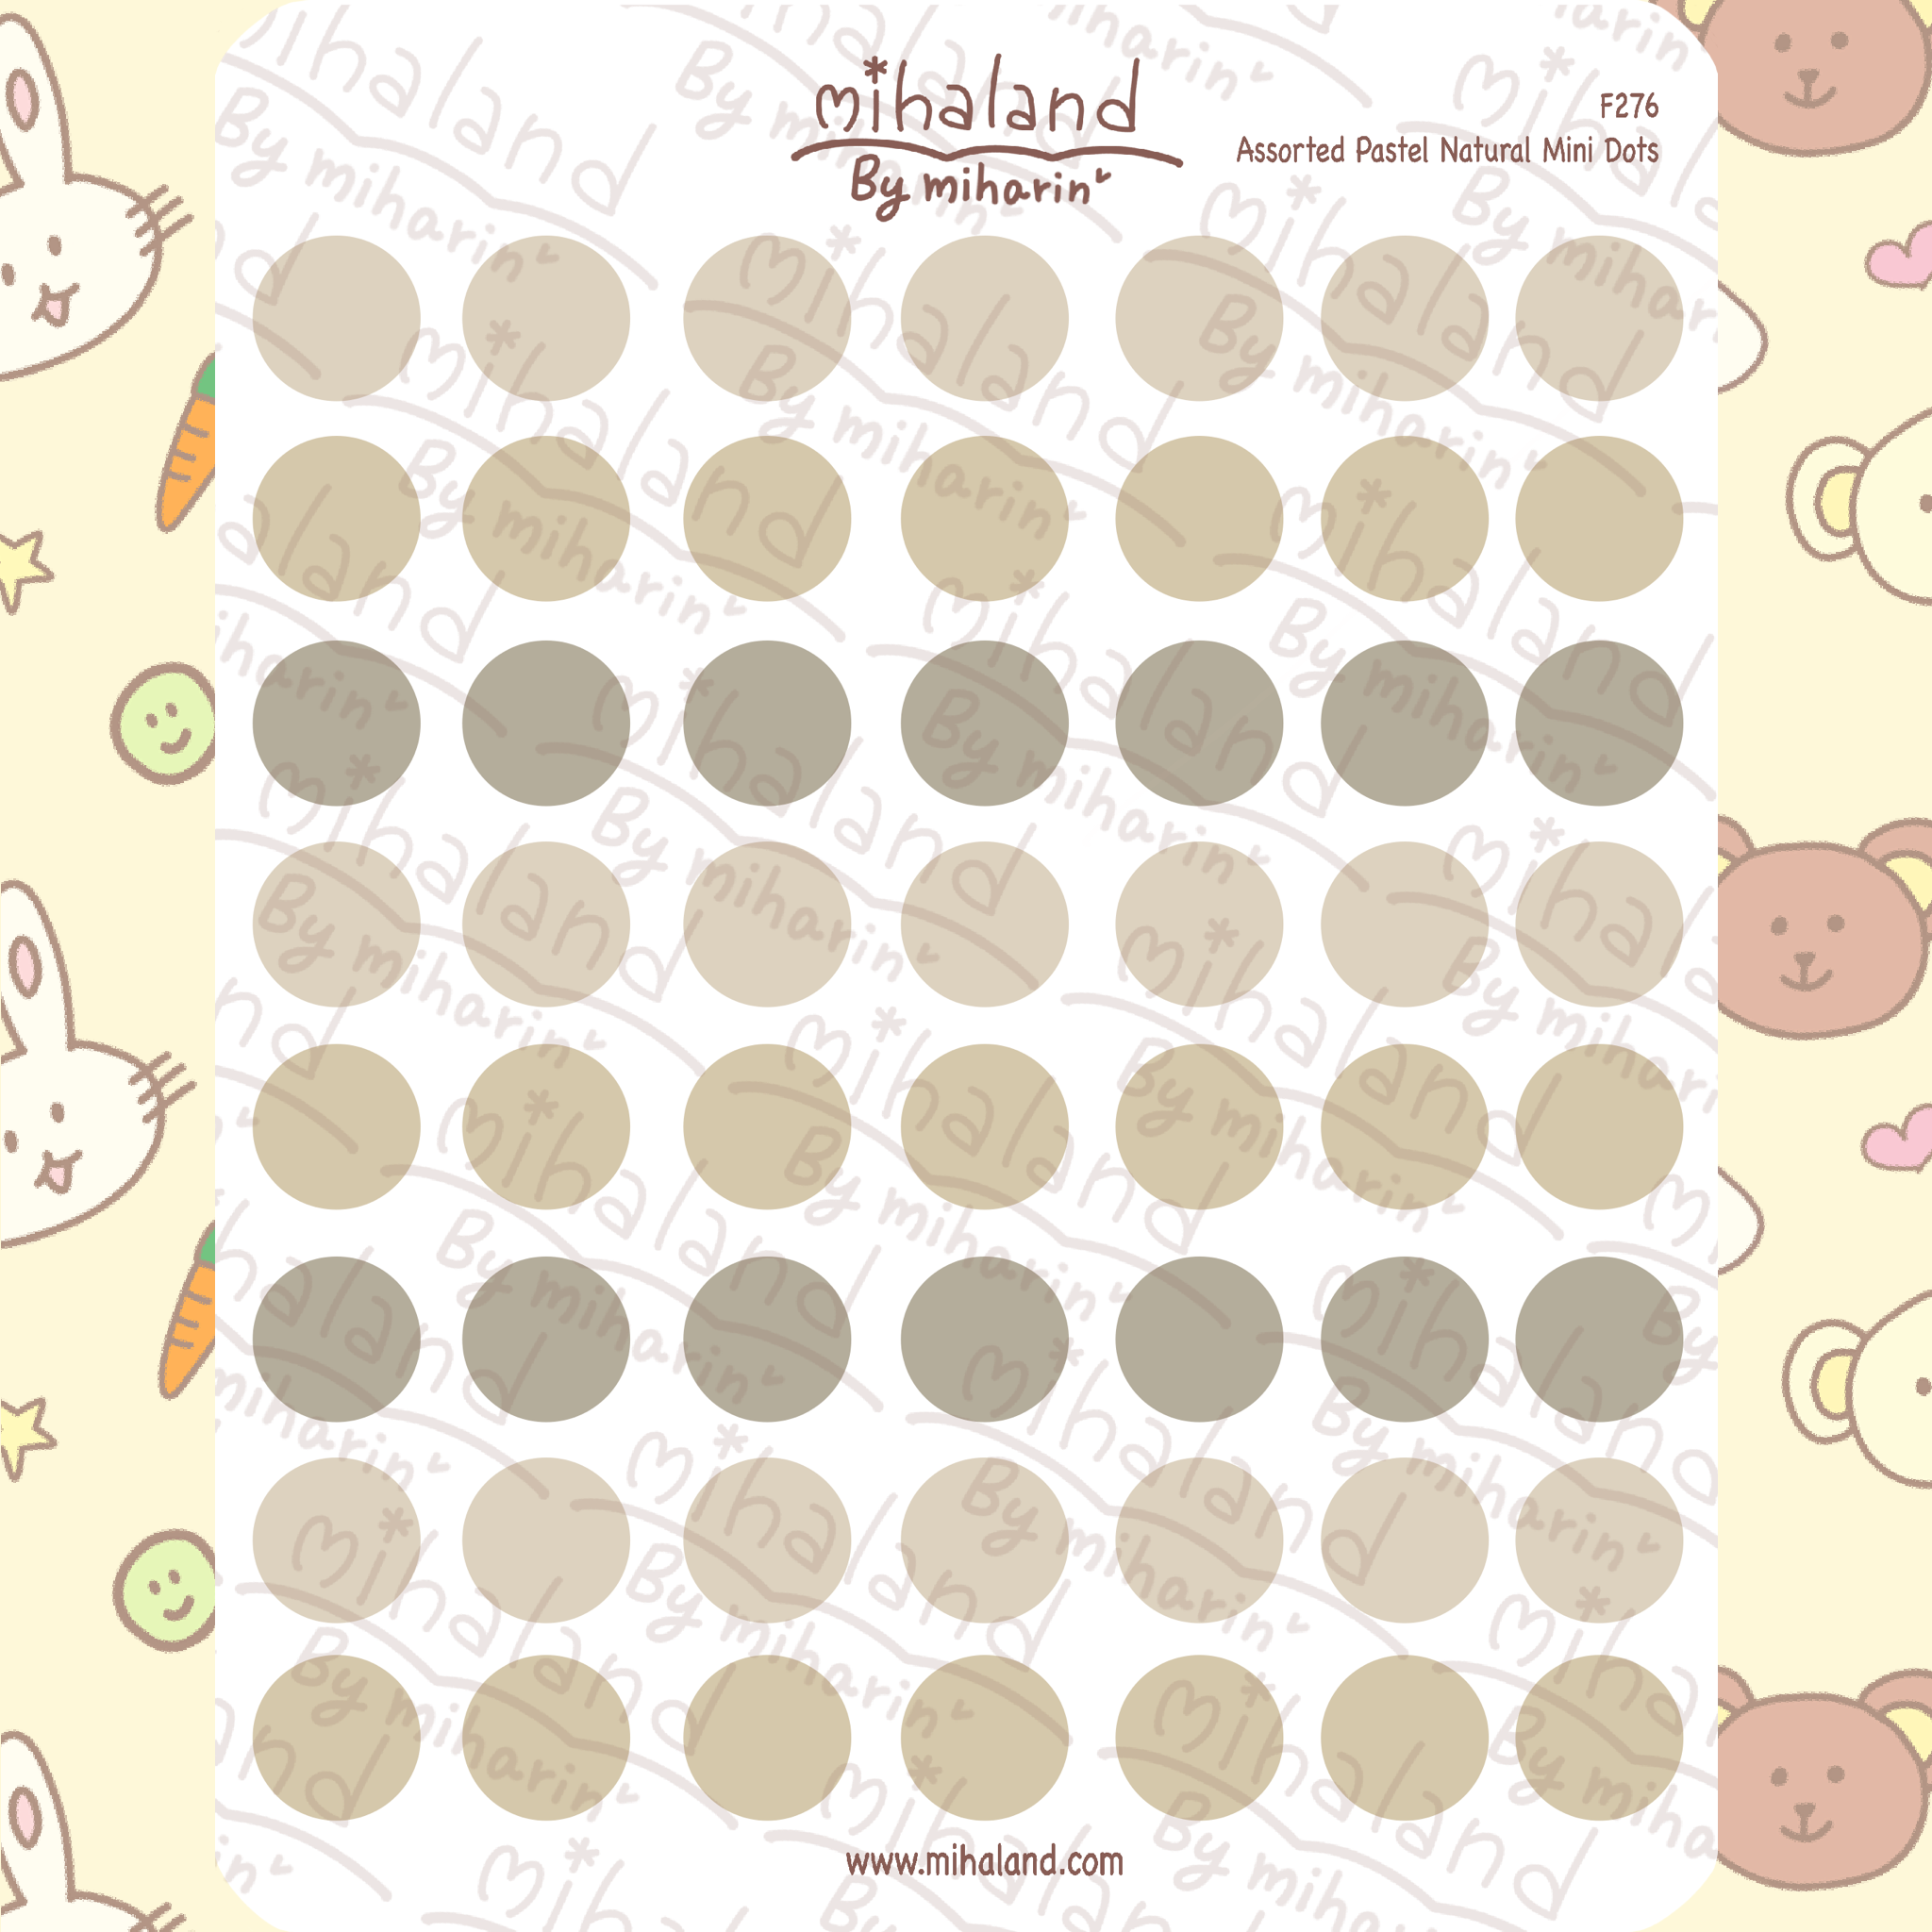 Assorted Pastel Natural Mini Dots Planner Stickers (F276)